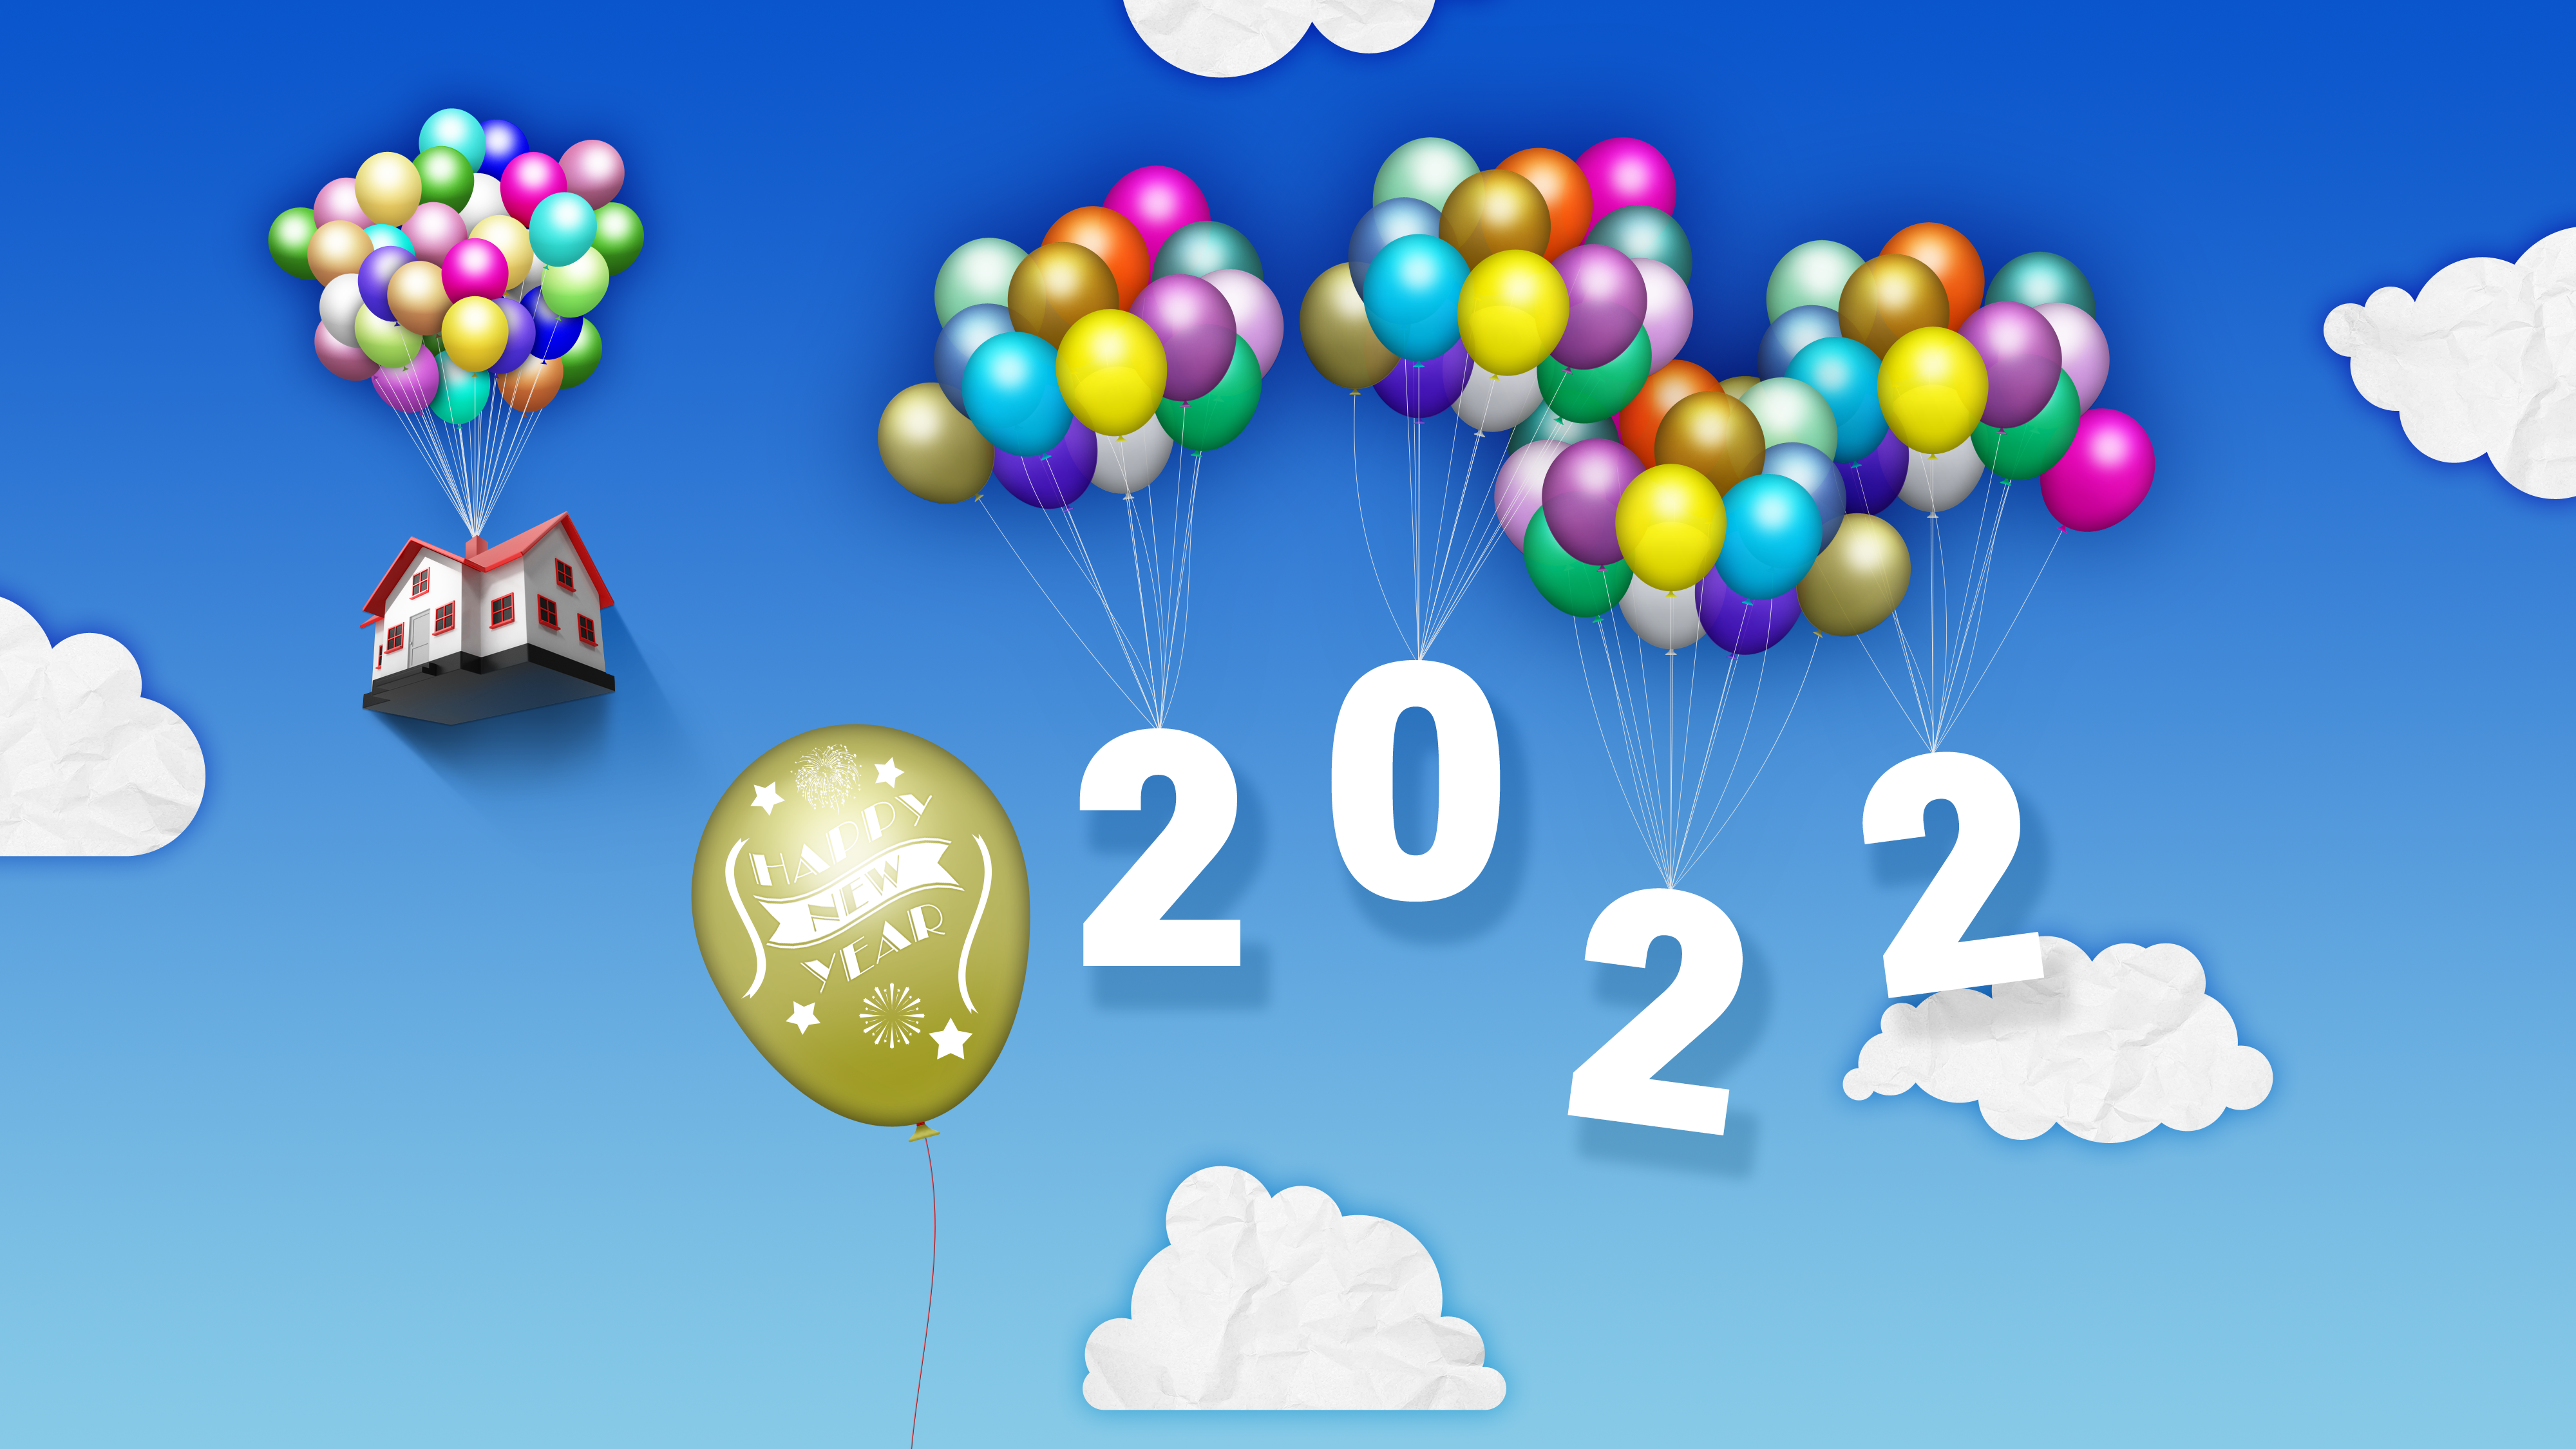 General 4000x2250 New Year clouds vector balloon typography simple background Up (movie) digital art 2022 (year)